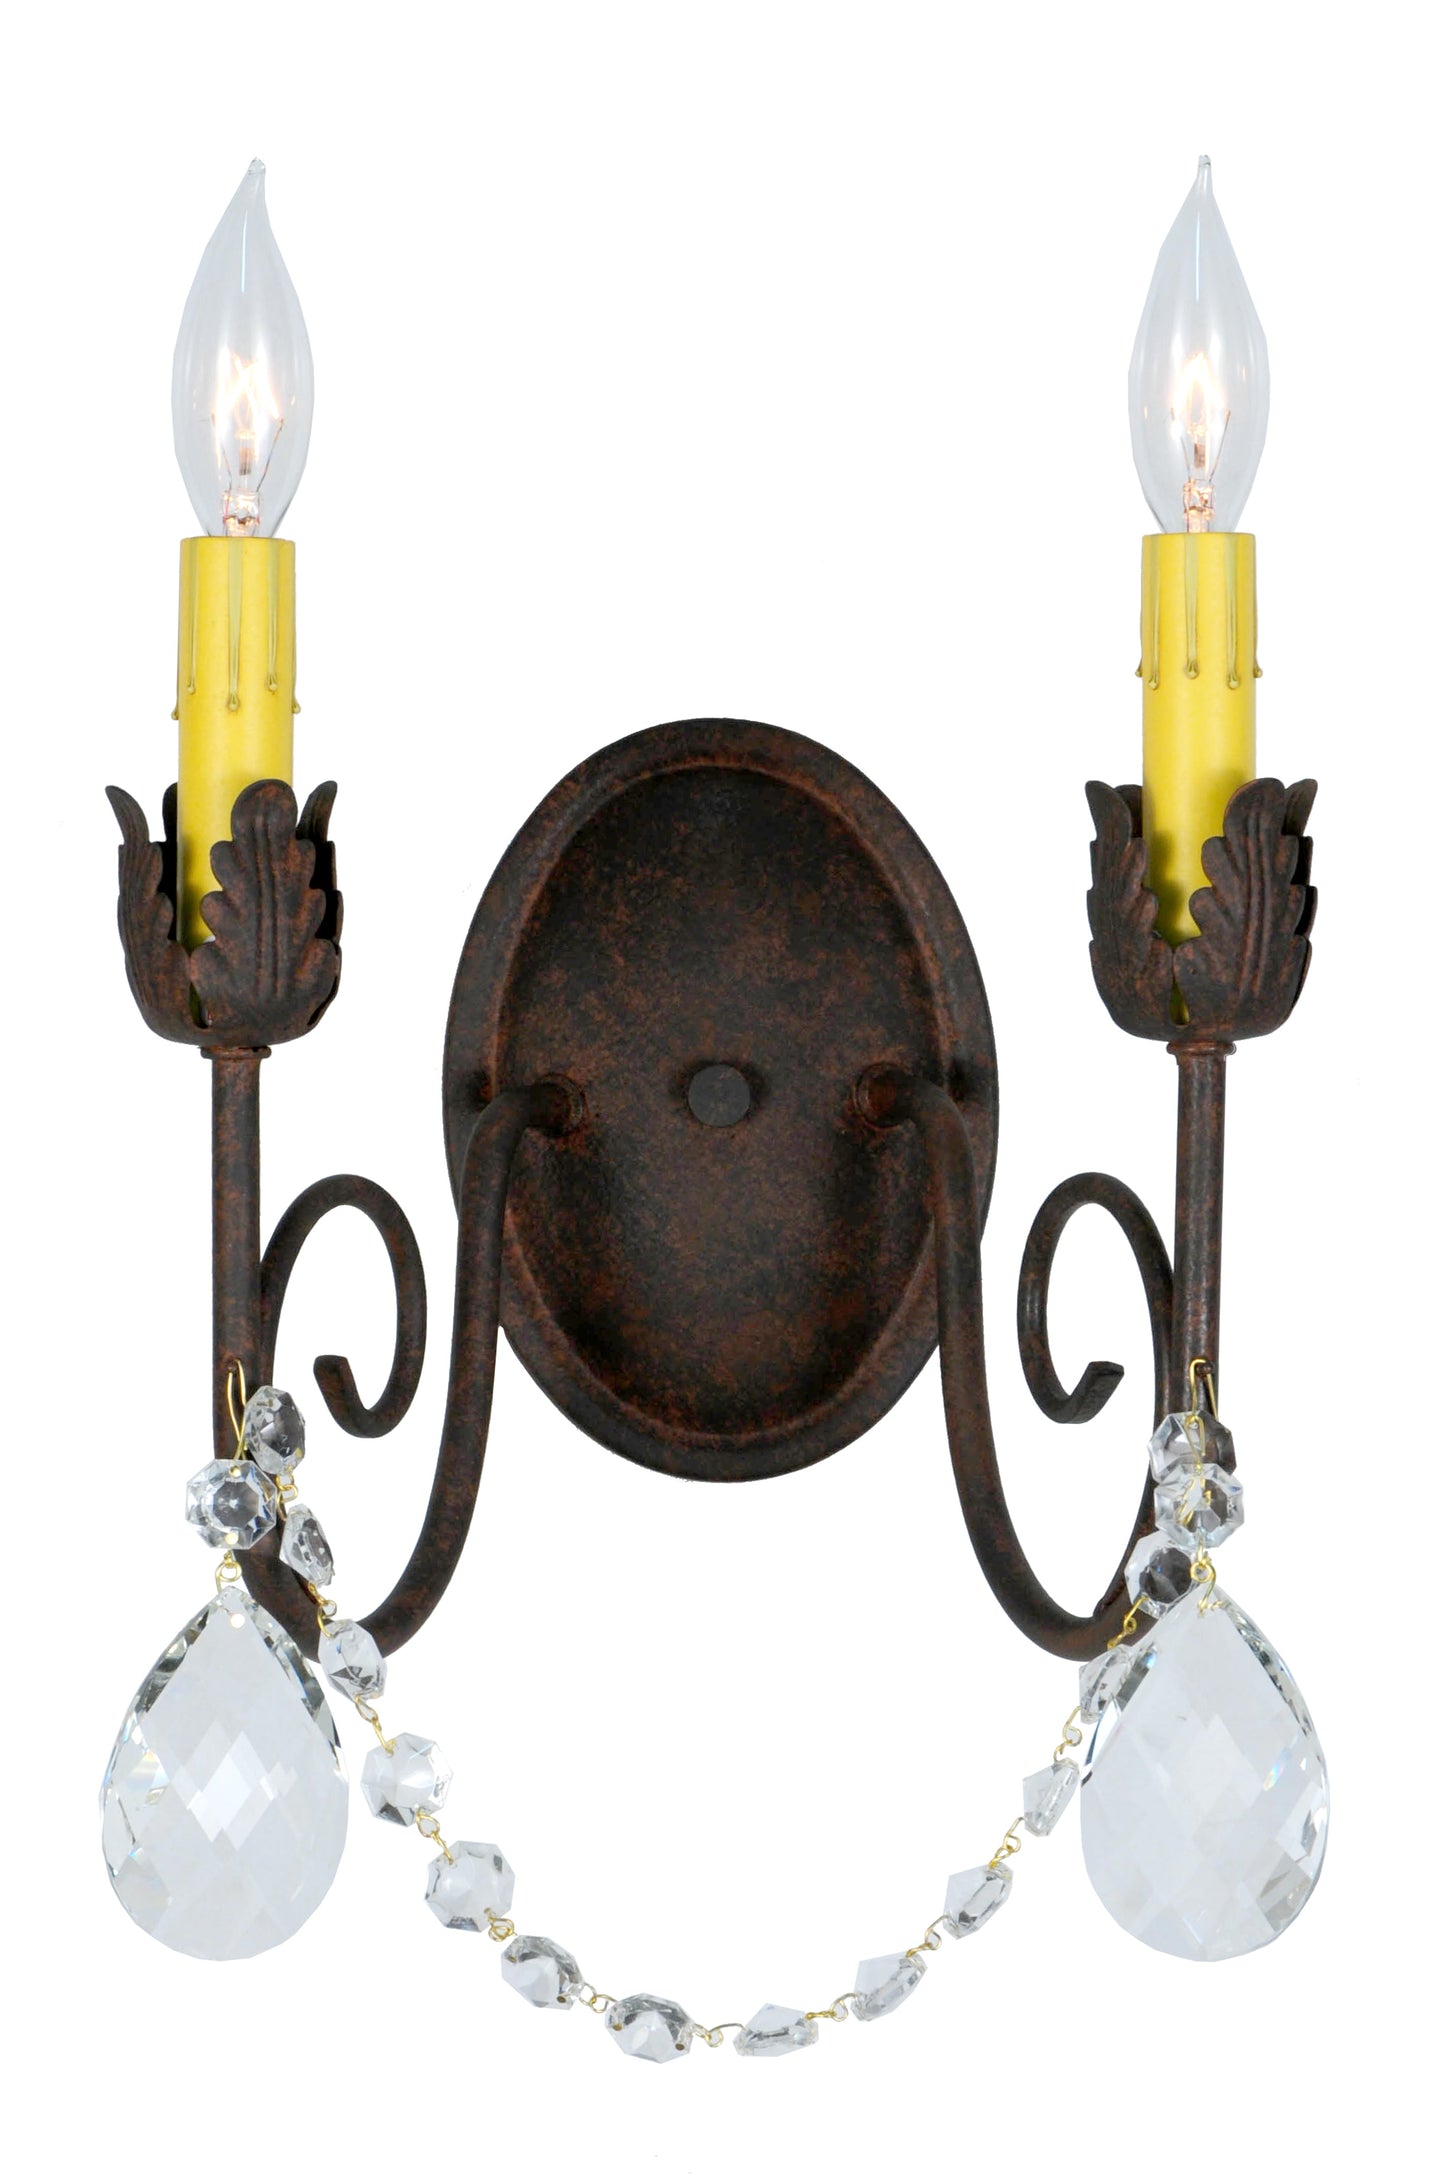 10" Antonia 2-Light Wall Sconce by 2nd Ave Lighting